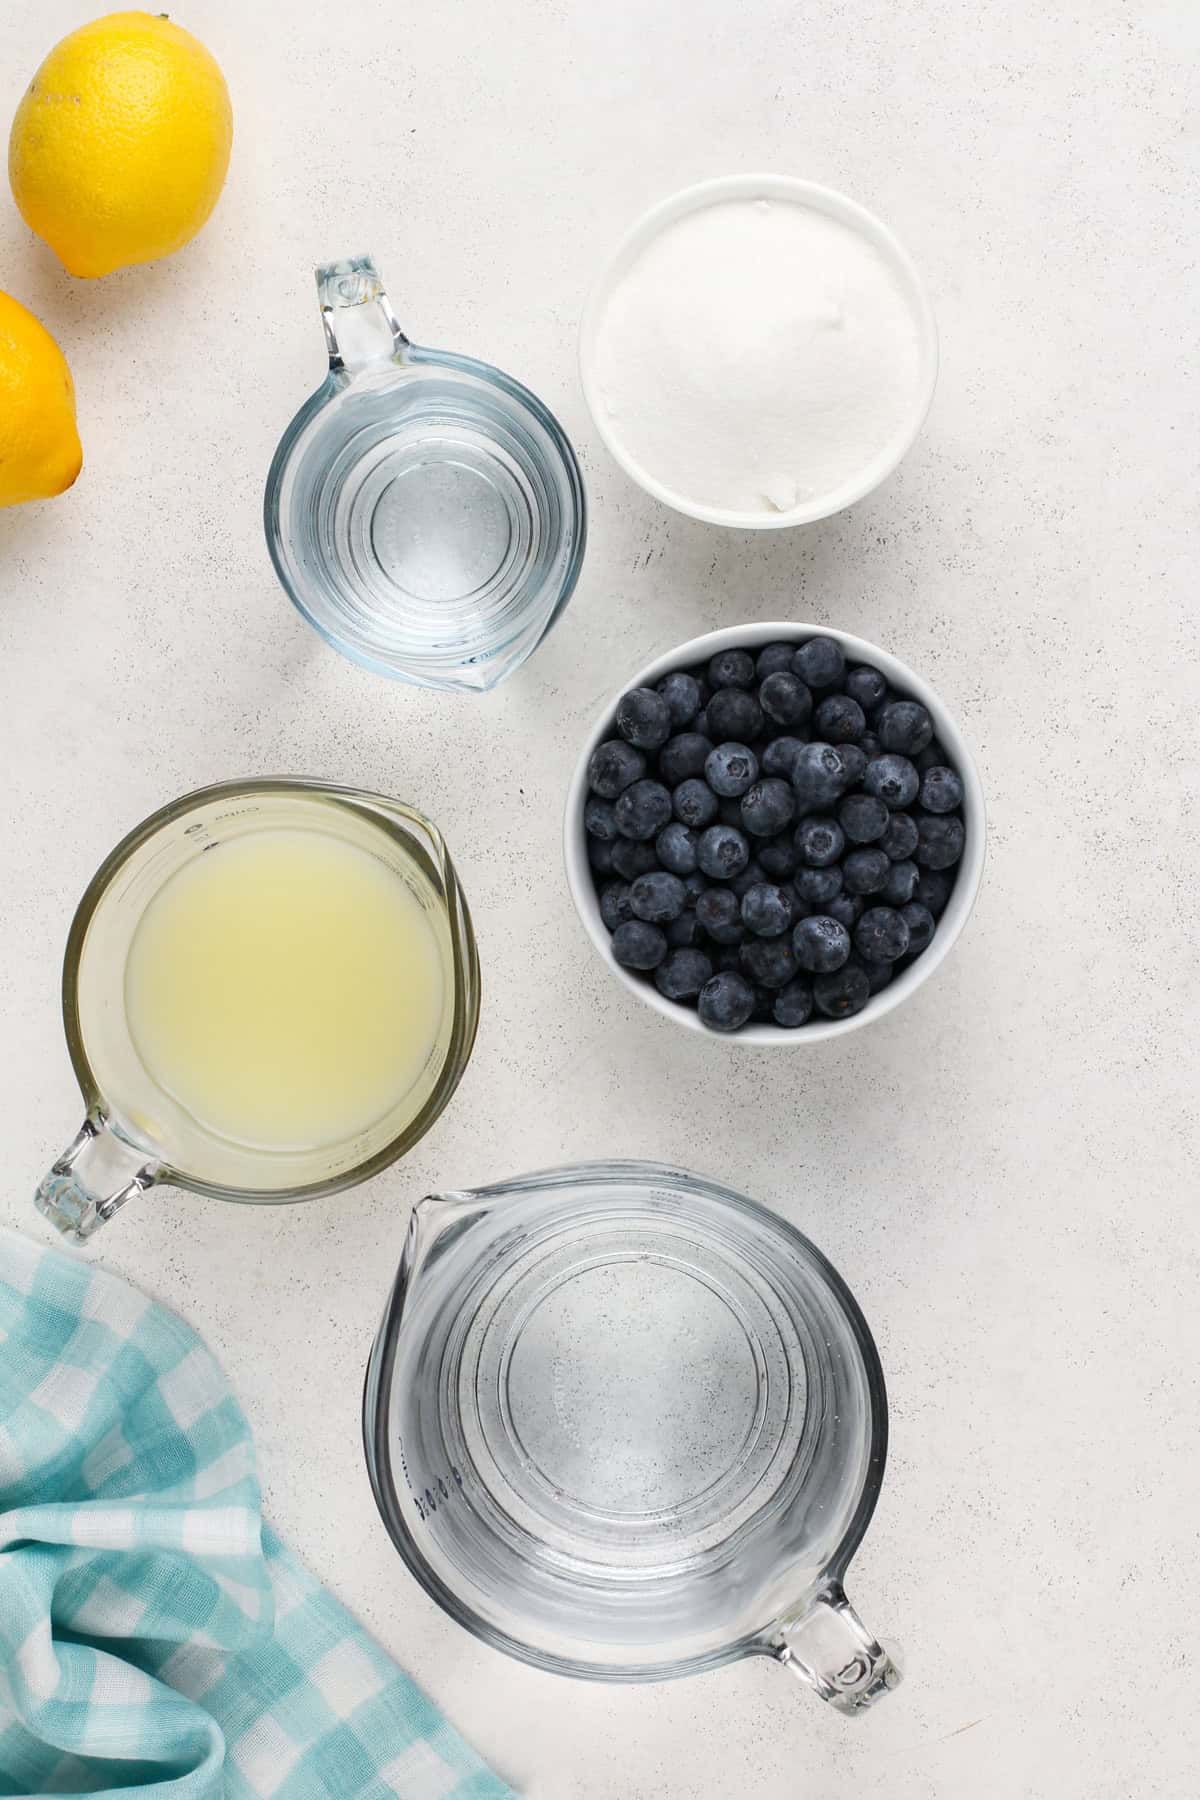 Ingredients for blueberry lemonade arranged on a light-colored countertop.